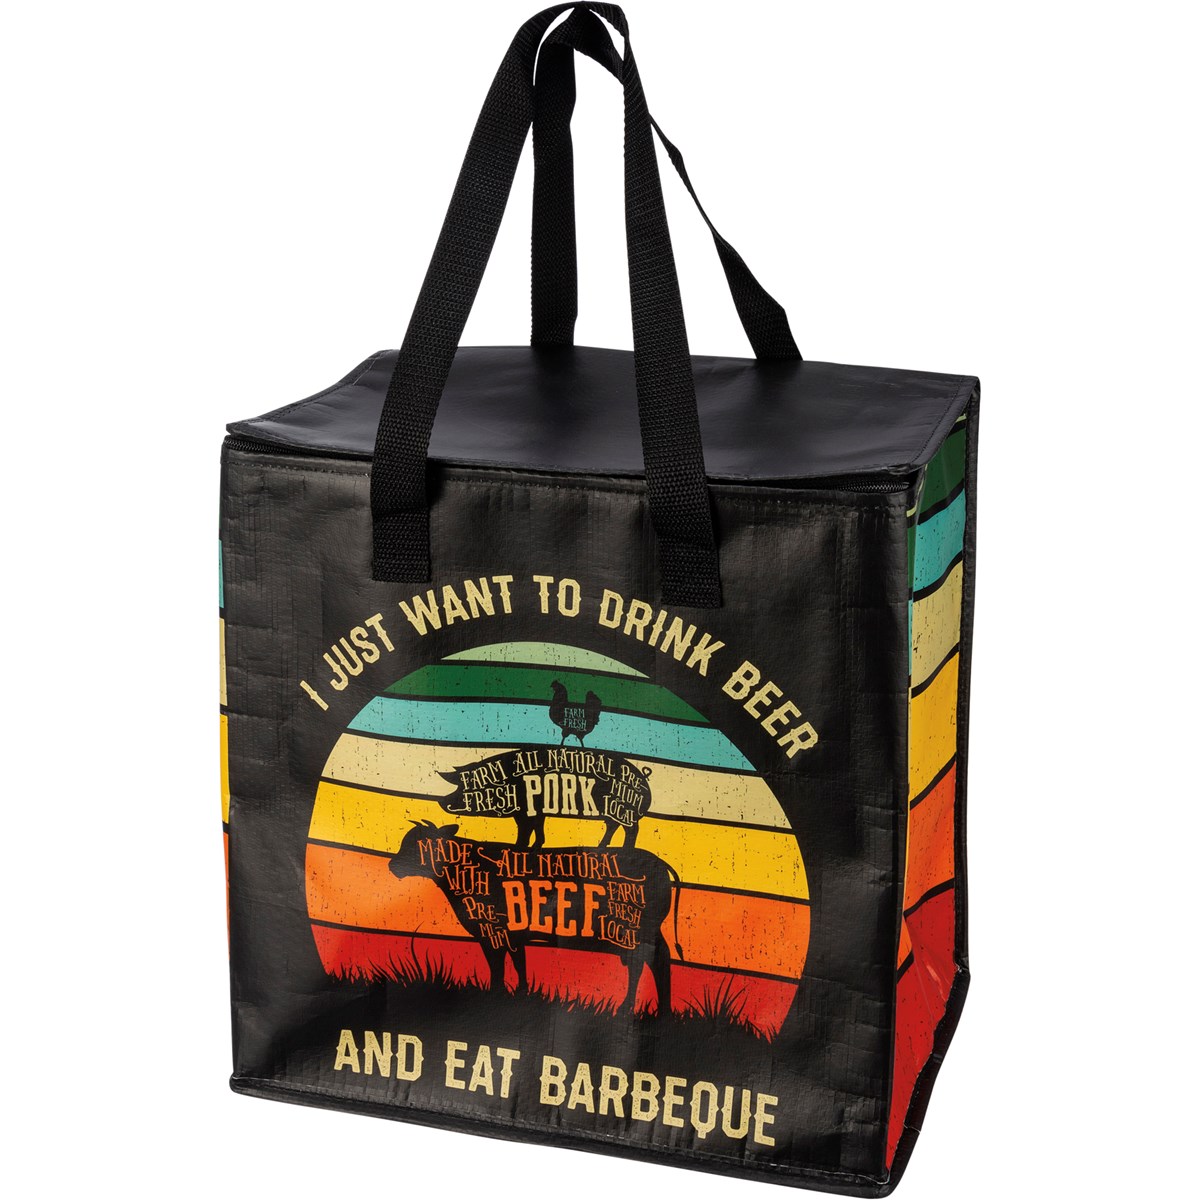 Eat Barbeque Insulated Tote - Post-Consumer Material, Nylon, Zipper